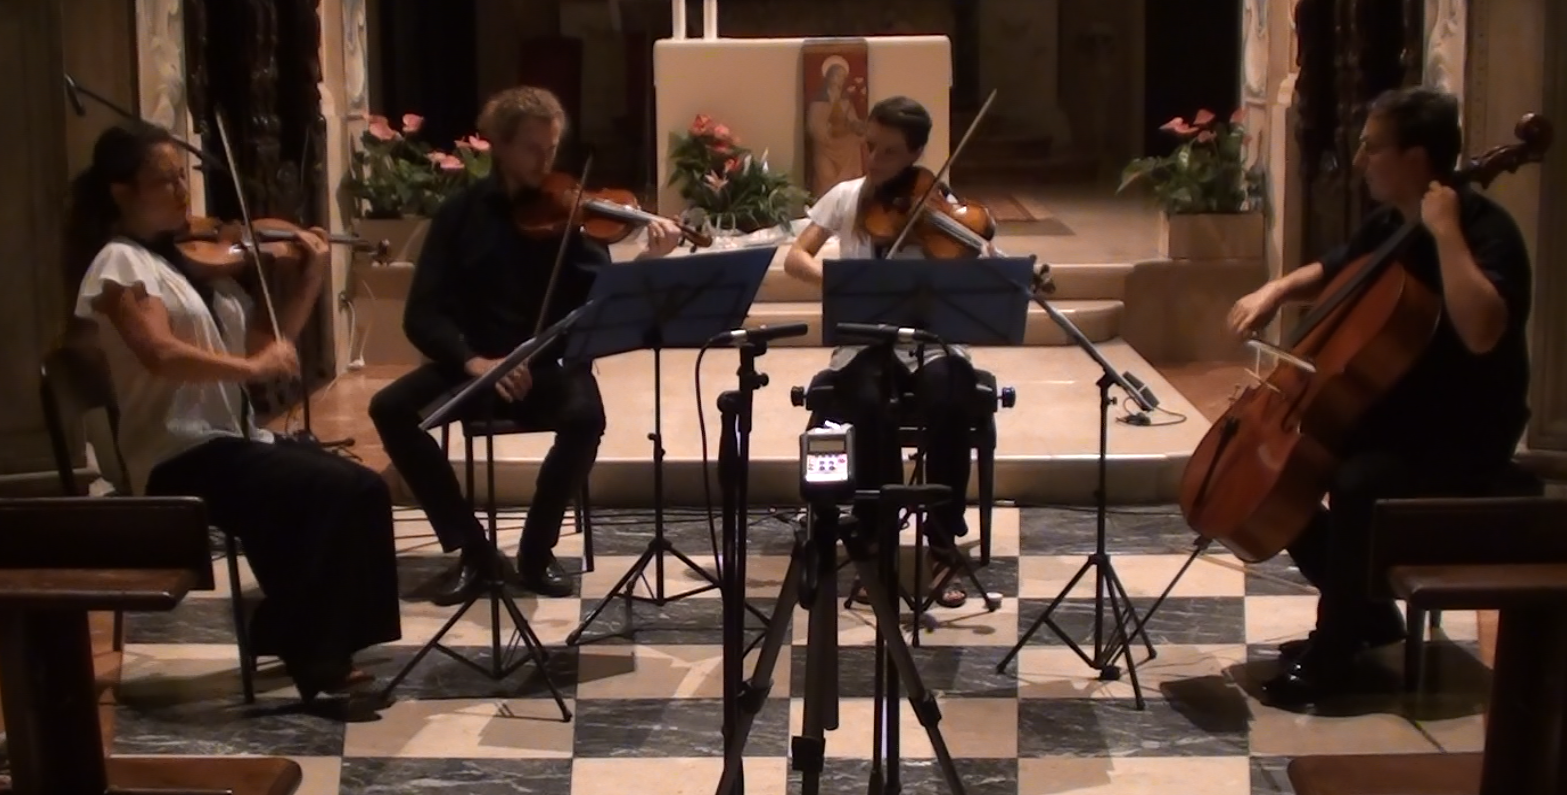 Quartetto Indaco perform the premiere of 